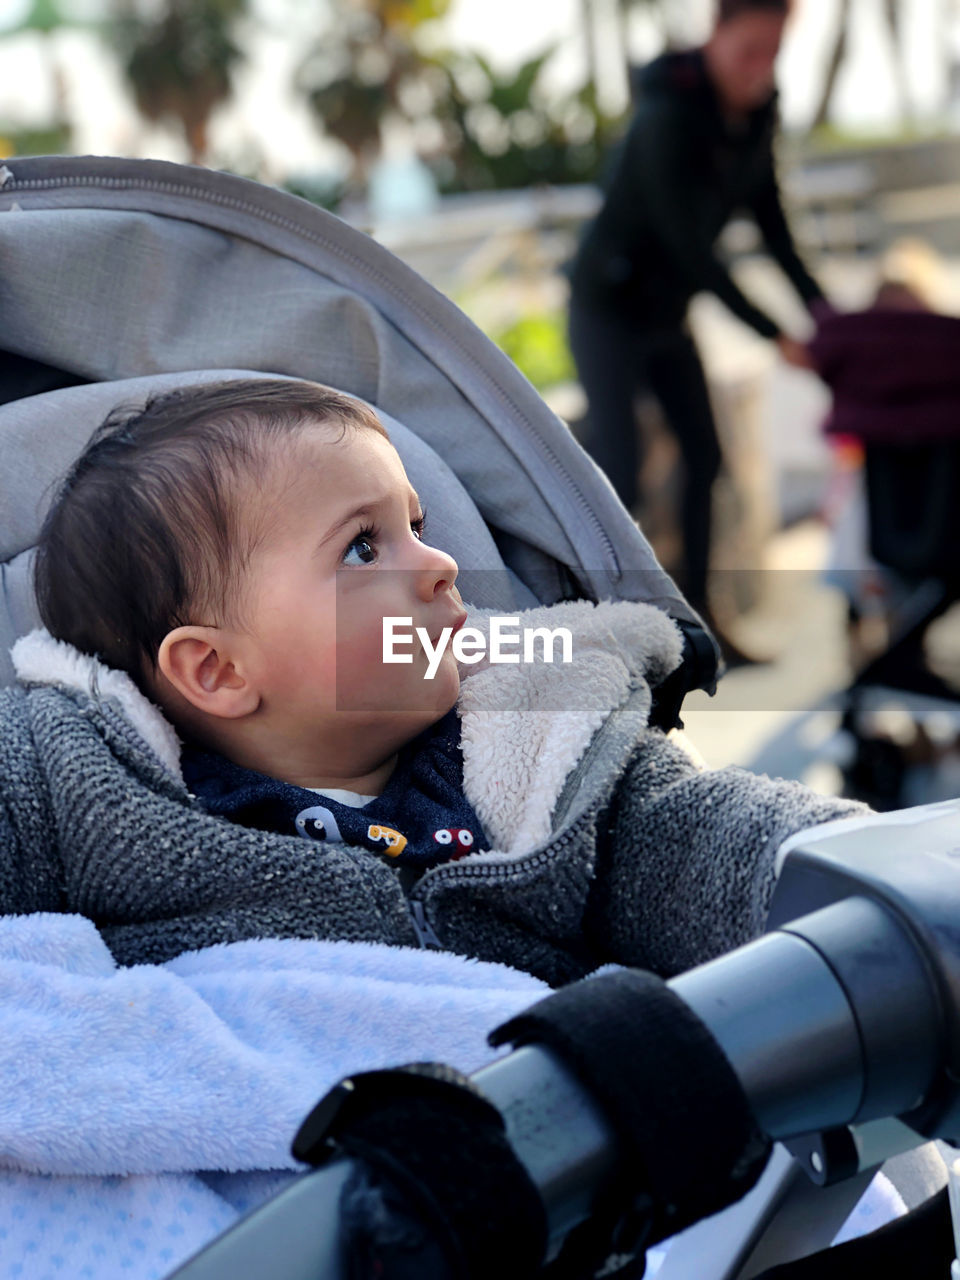 Little boy in his baby carriage, looking around, serious on a winter day. with a blanket on her lap.